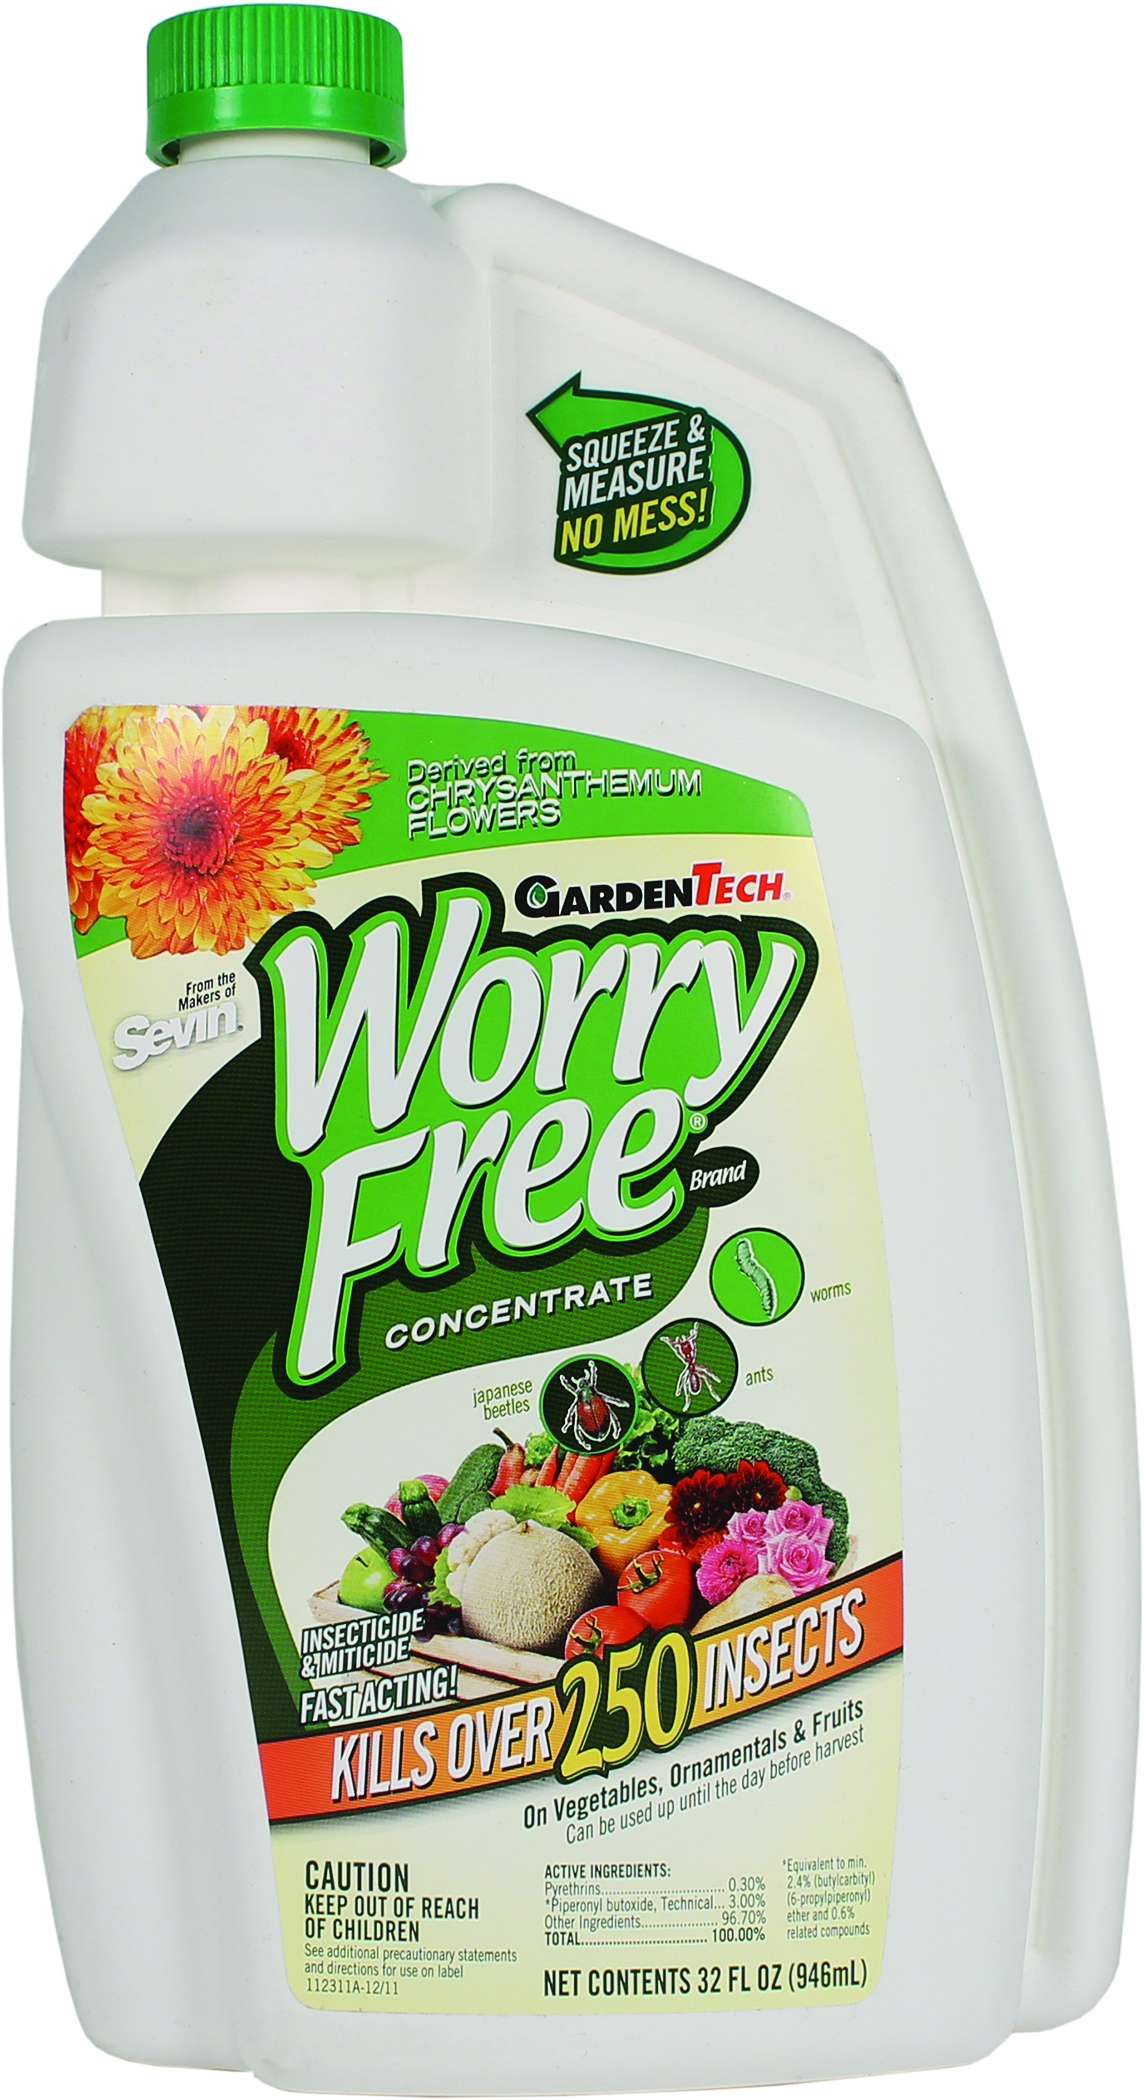 GARDENTECH WORRY FREE INSECTICIDE CONCENTRATE